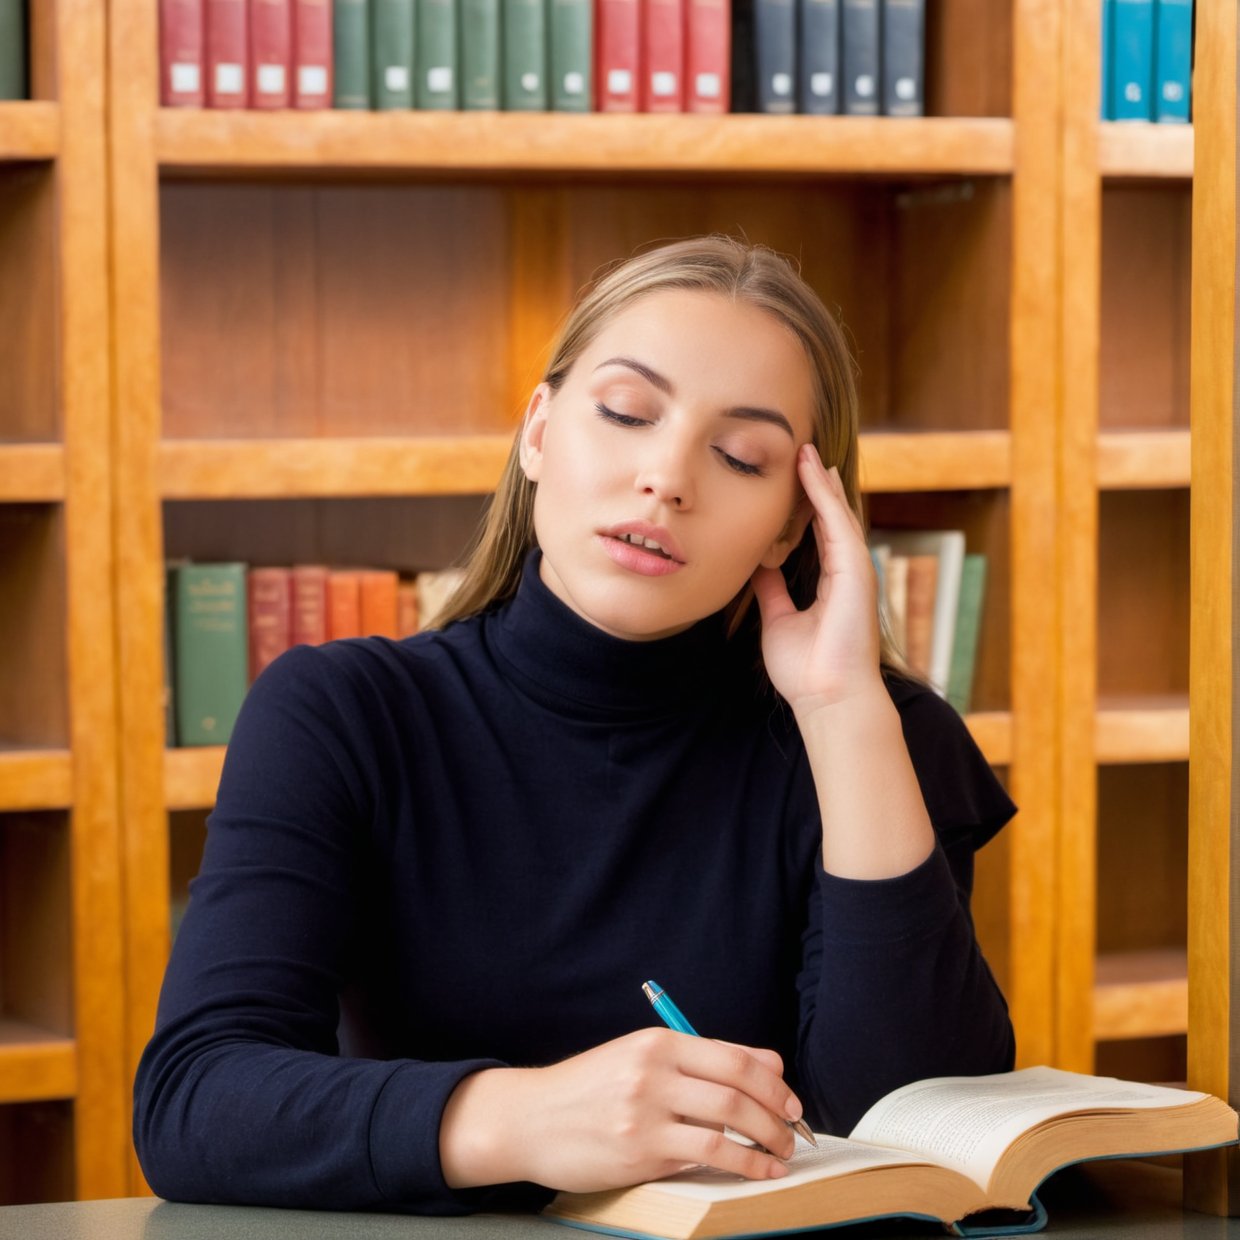 person focuses on study in a bibliotheque,realistic